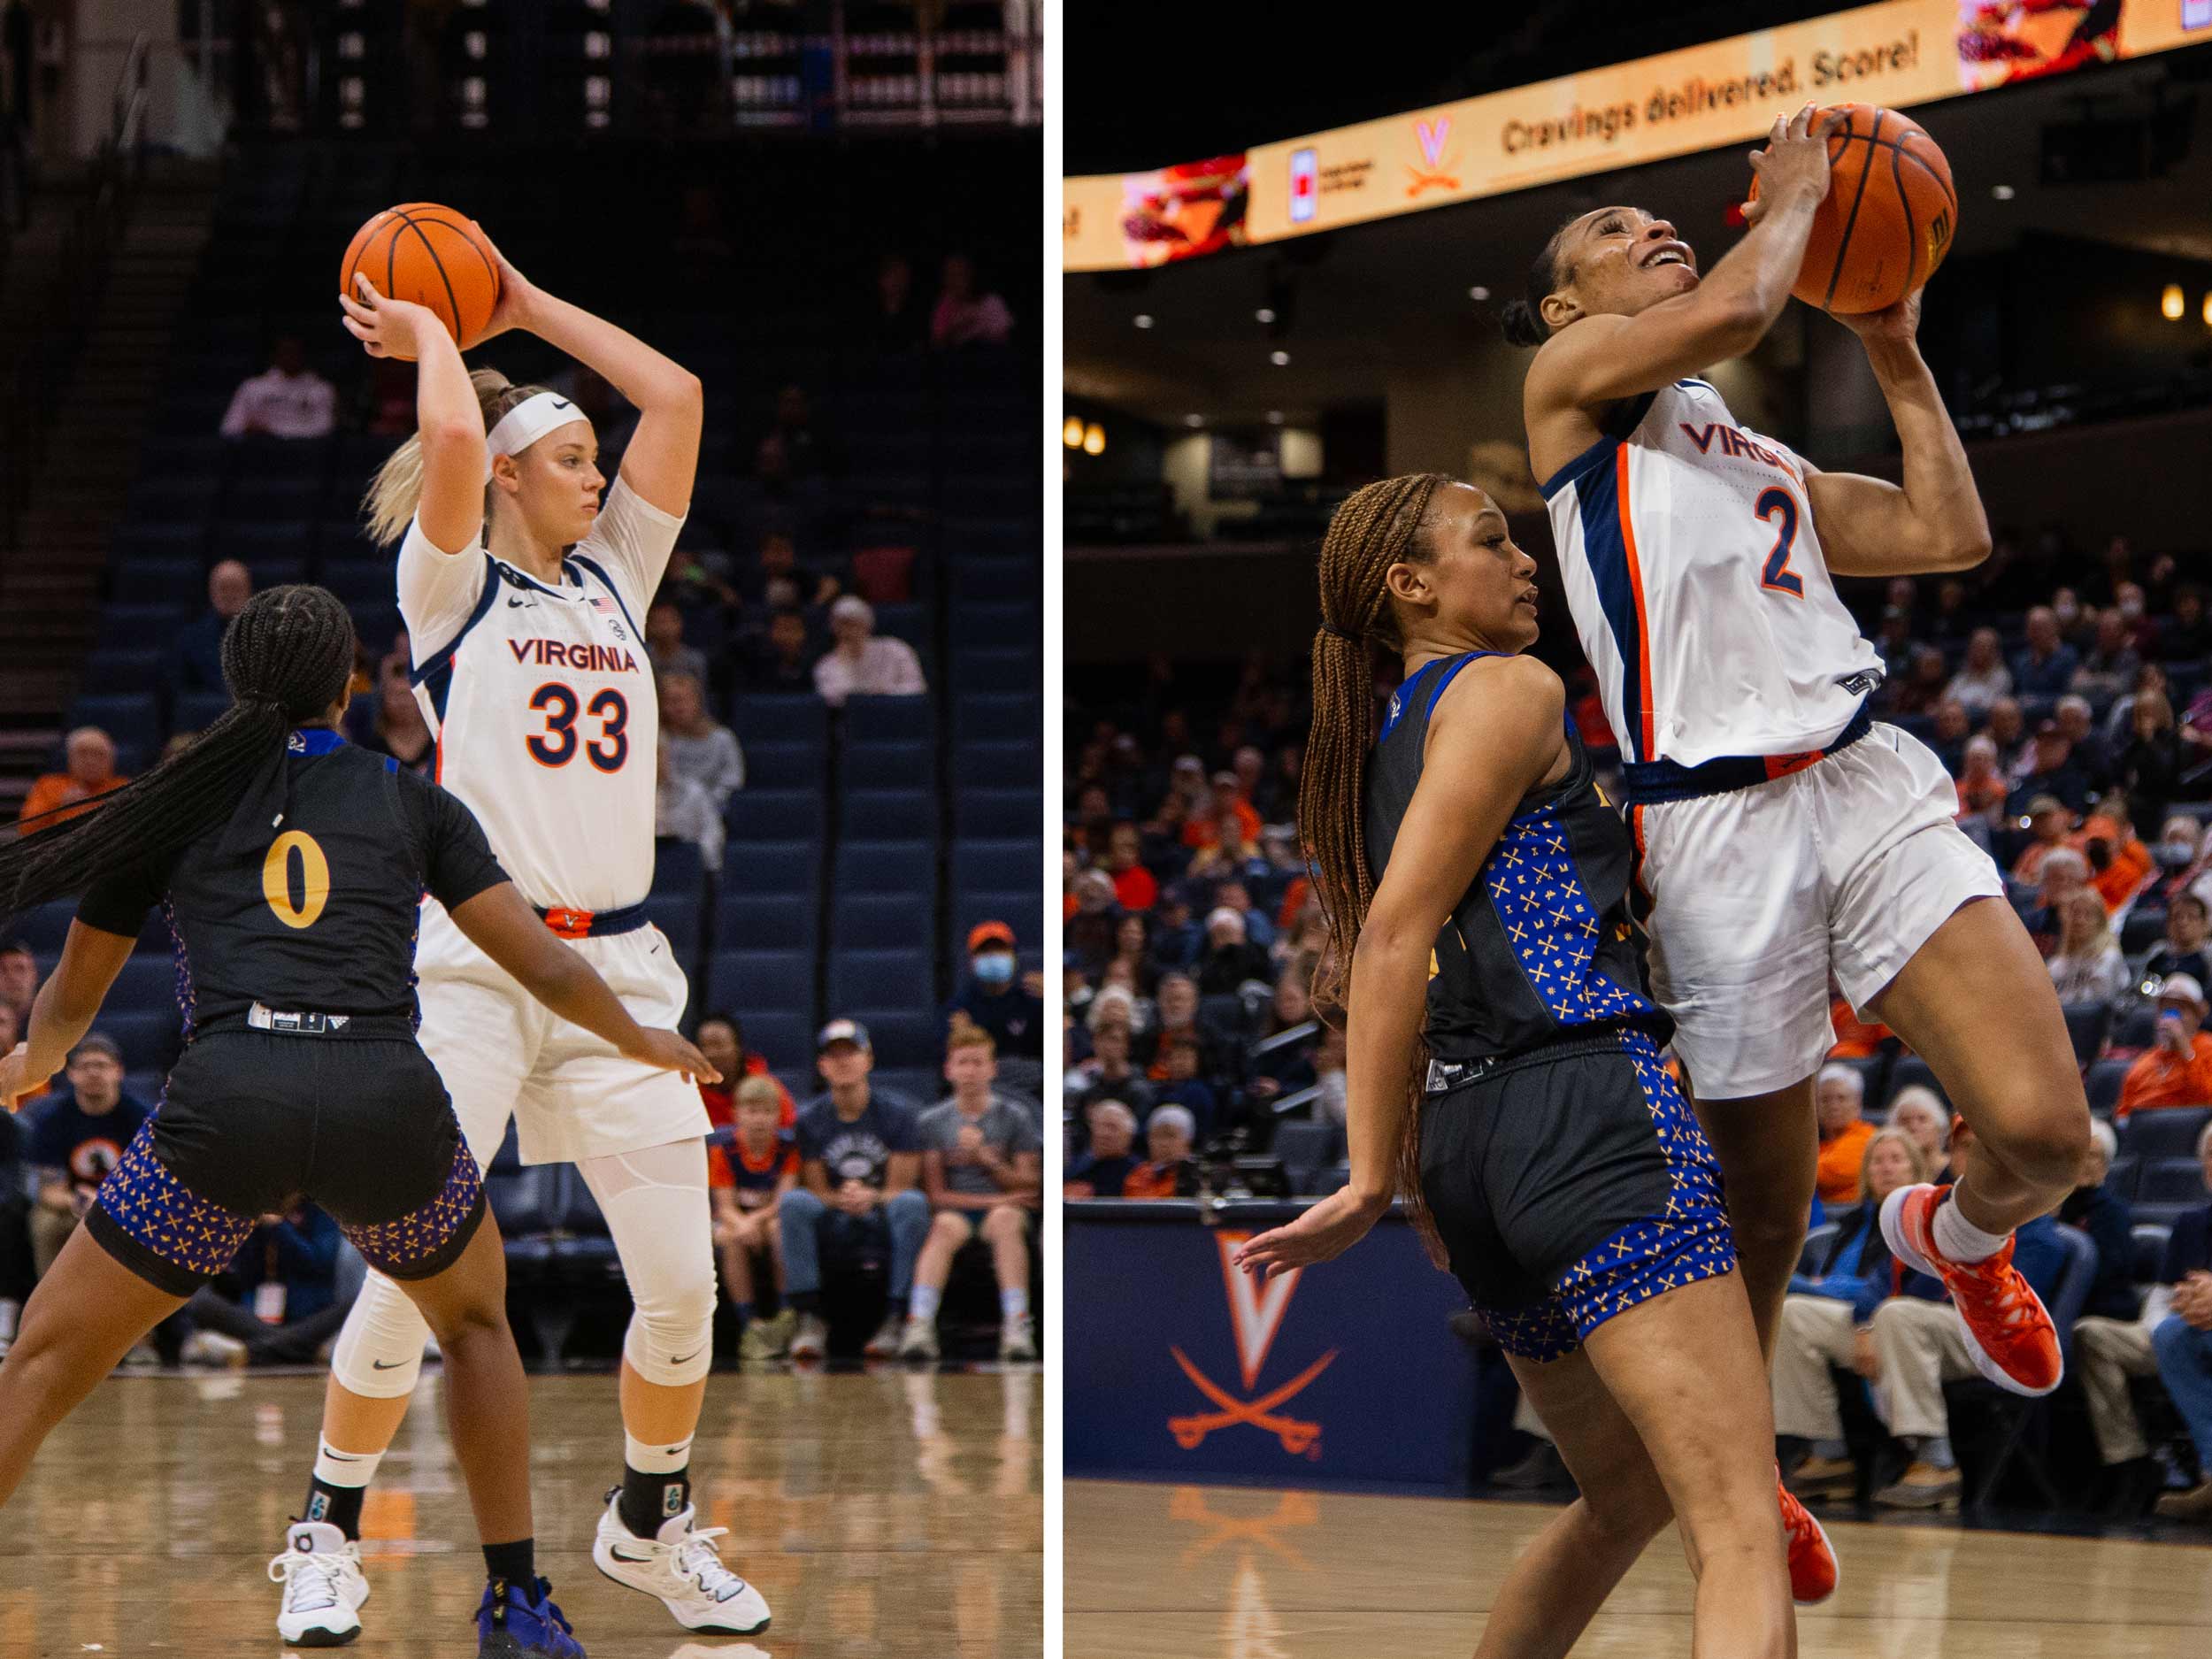 Left: Sam Brunelle preparing to pass the basketball to a teammate.  Right: Taylor Valladay jumping up to perform a layup.